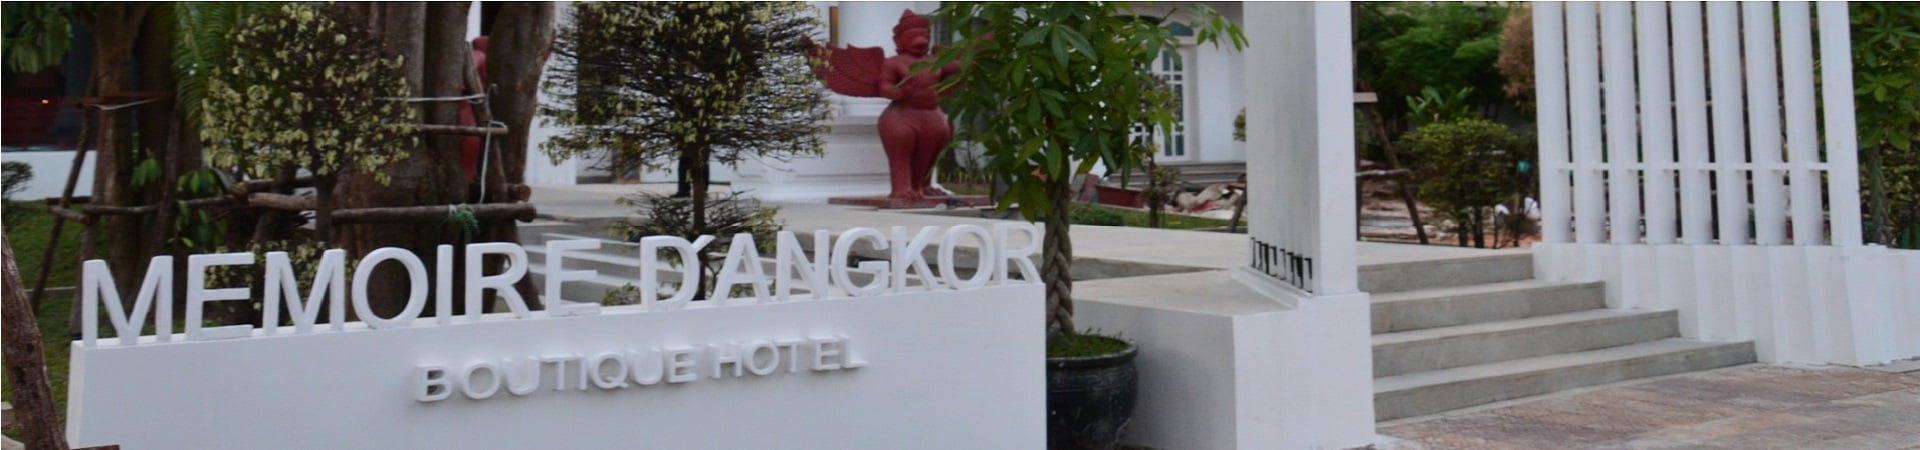 Image of Memoire d’ Angkor Boutique Hotel